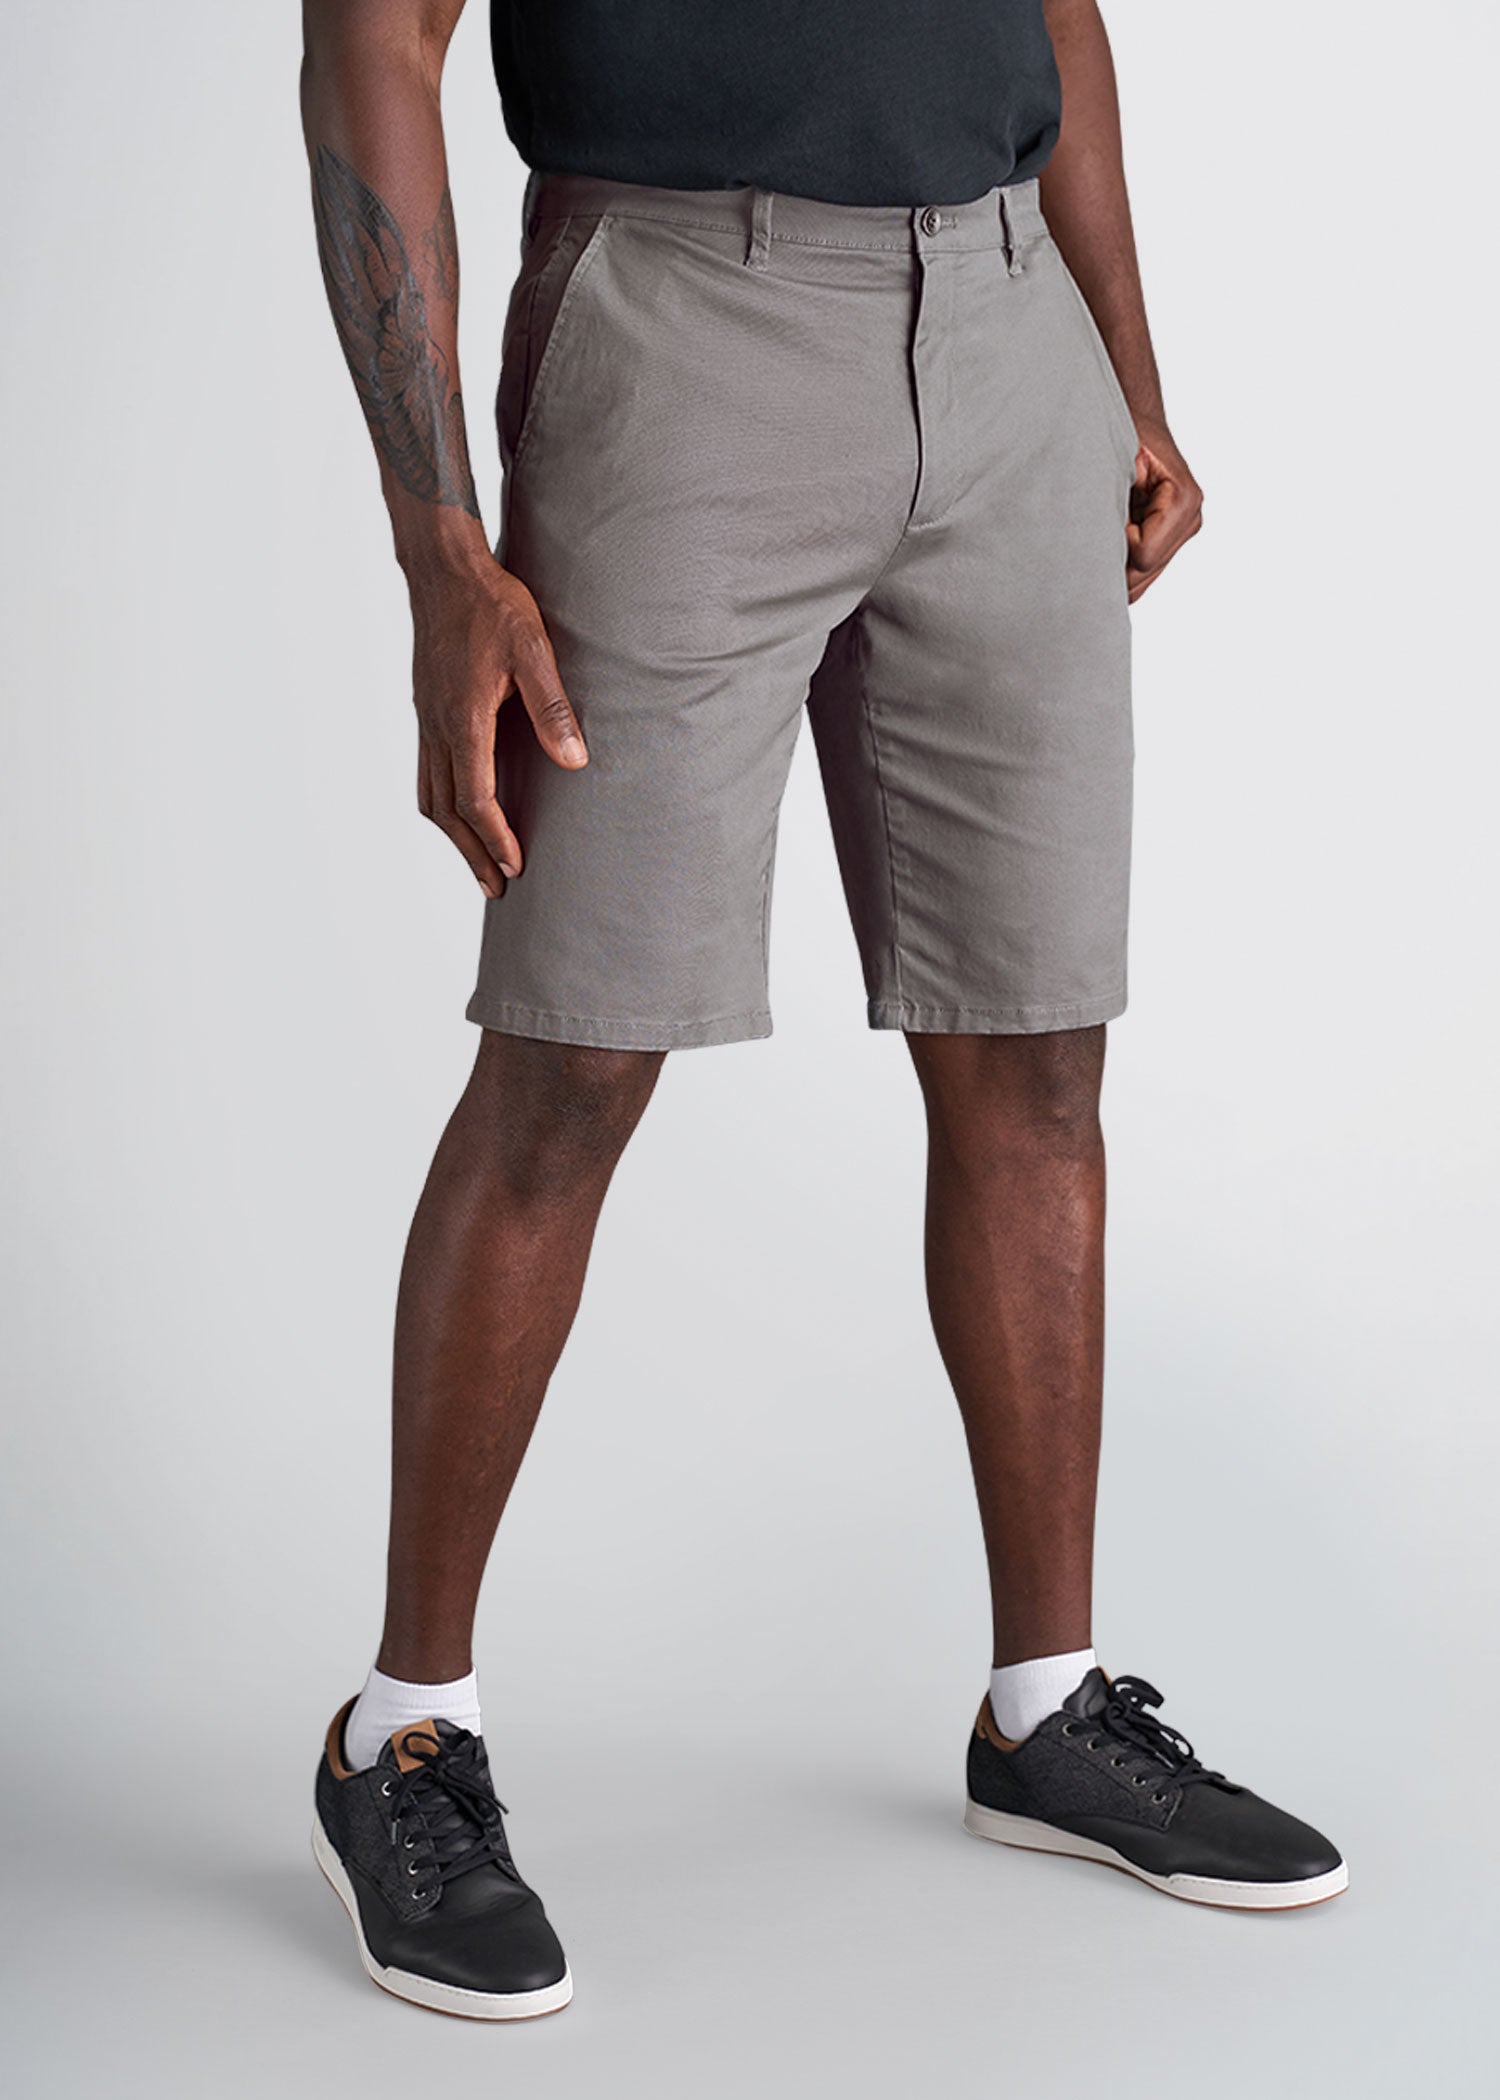 Tall Shorts for Men 6'3